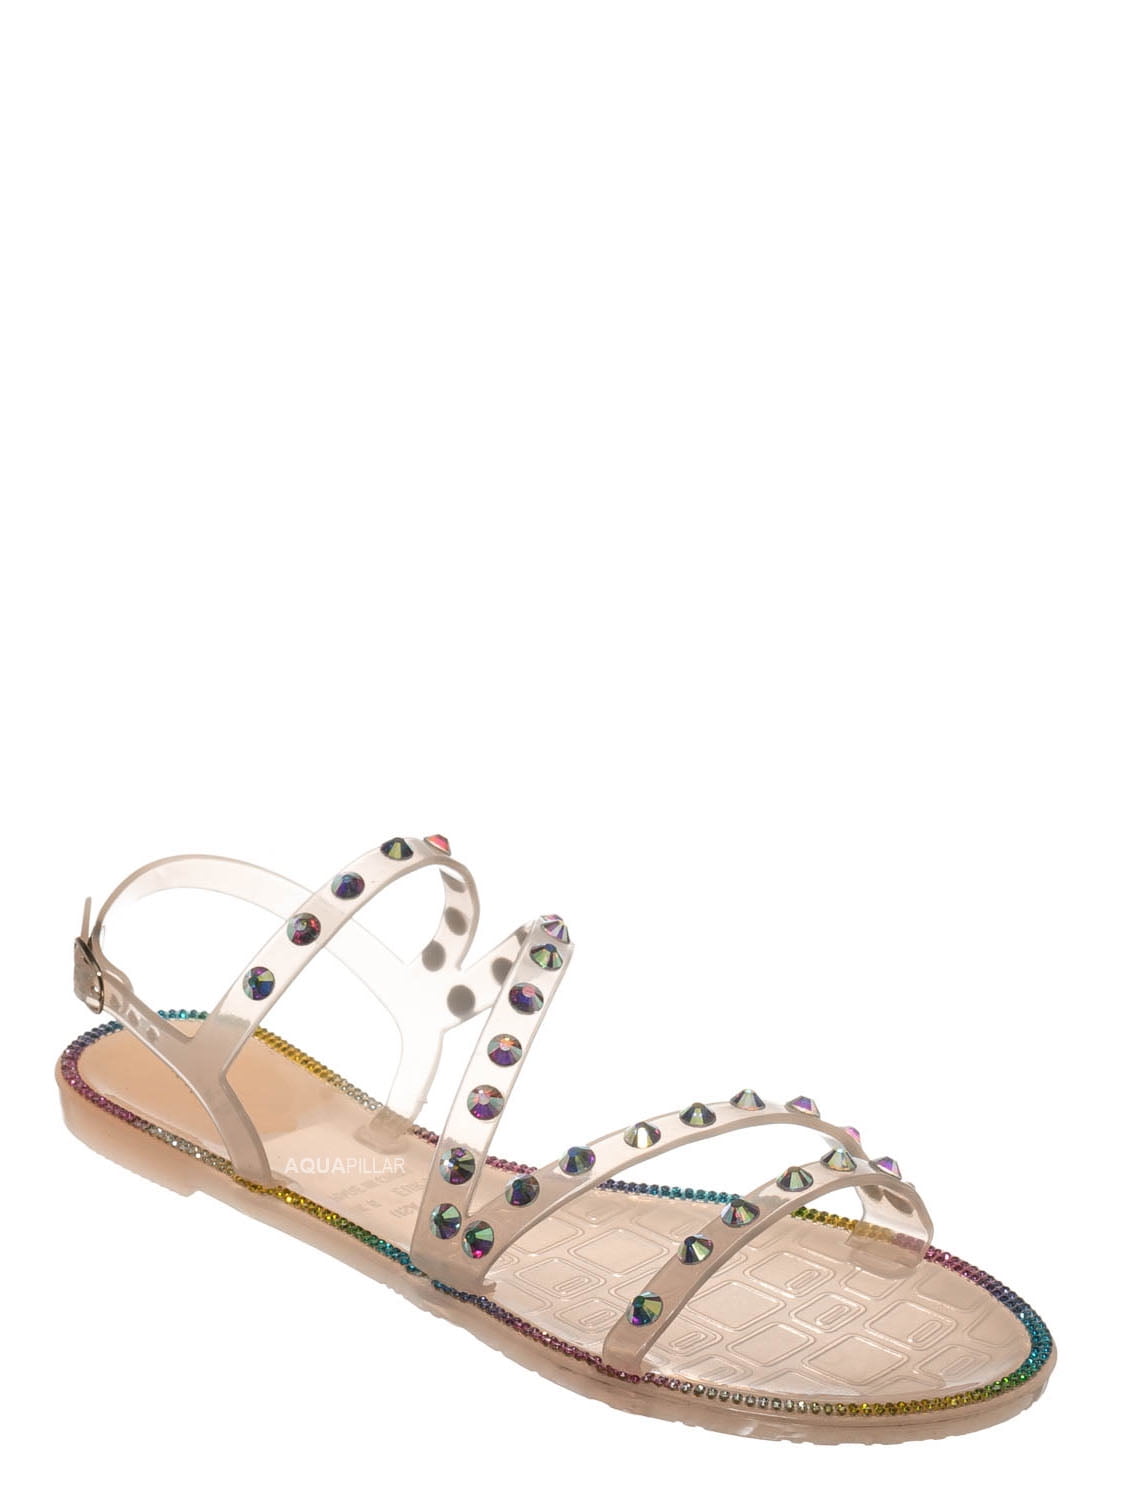 Alison01 by Bamboo, Lucite Rhinestone Jelly Sandal - Punk Rock ...